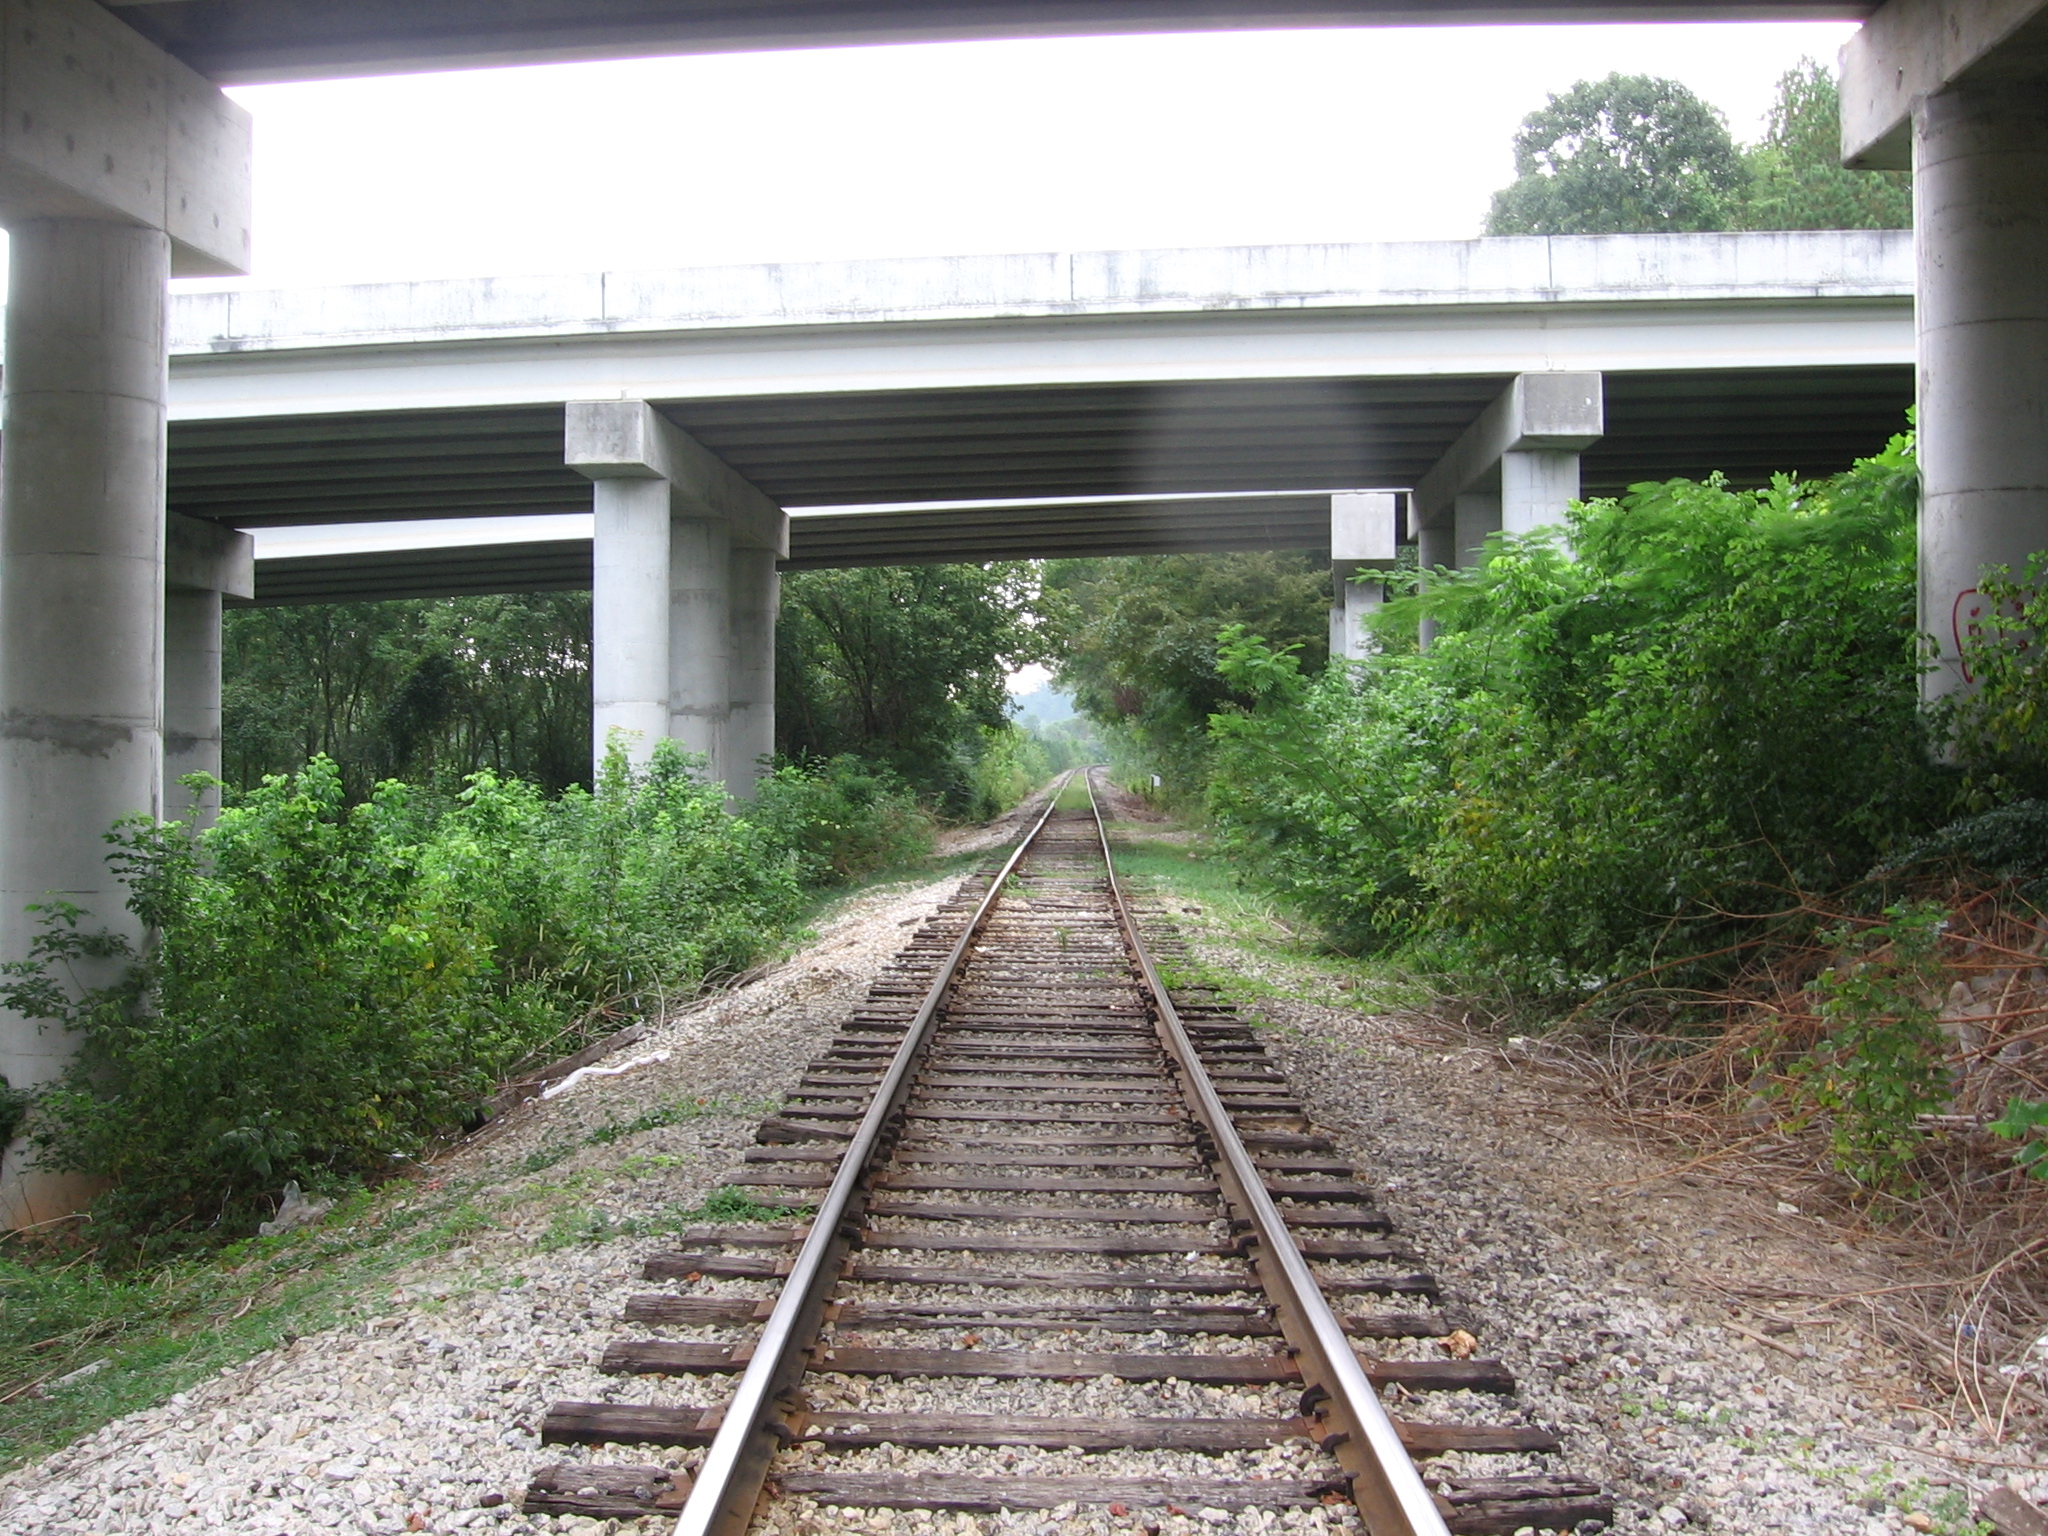 a railroad track beneath an overpass that crosses underneath an overpass